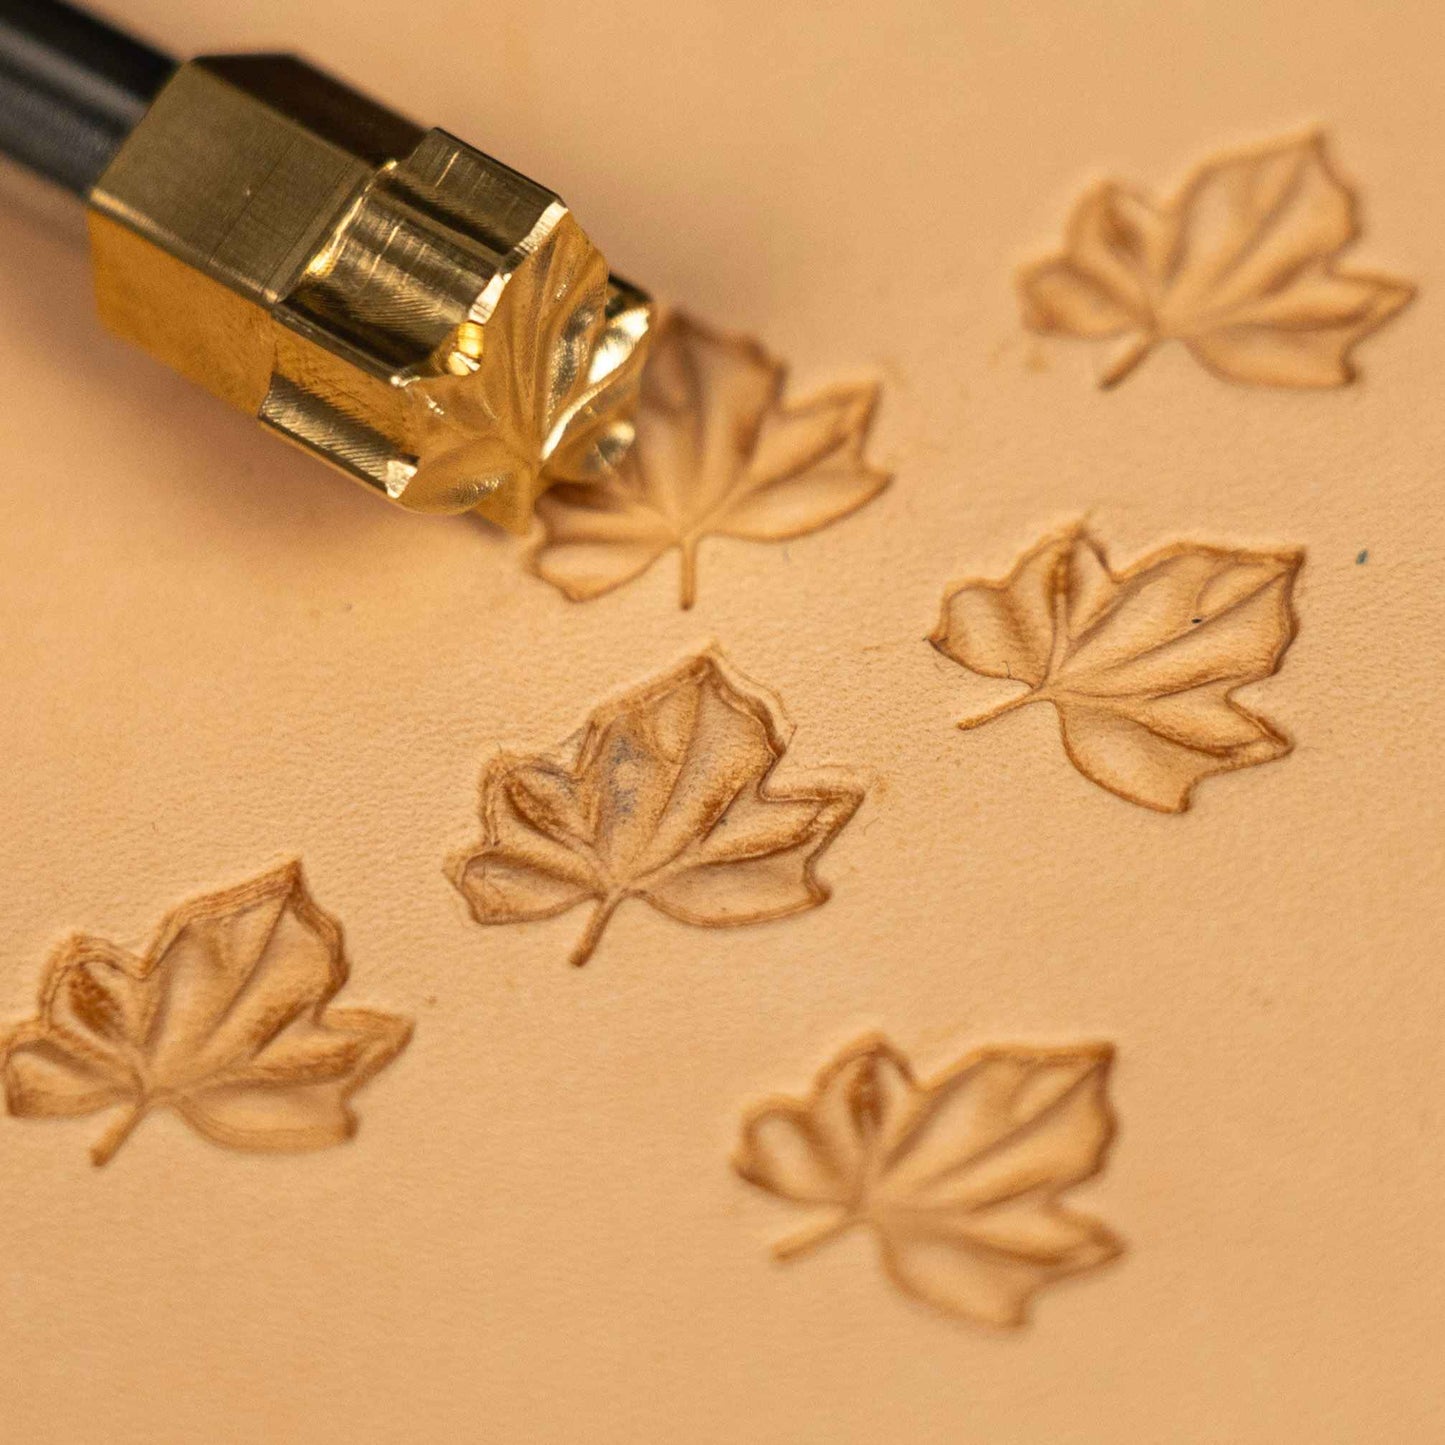 LT365 Premium Leather Stamping Tools for Professional Crafters-15x14mm size